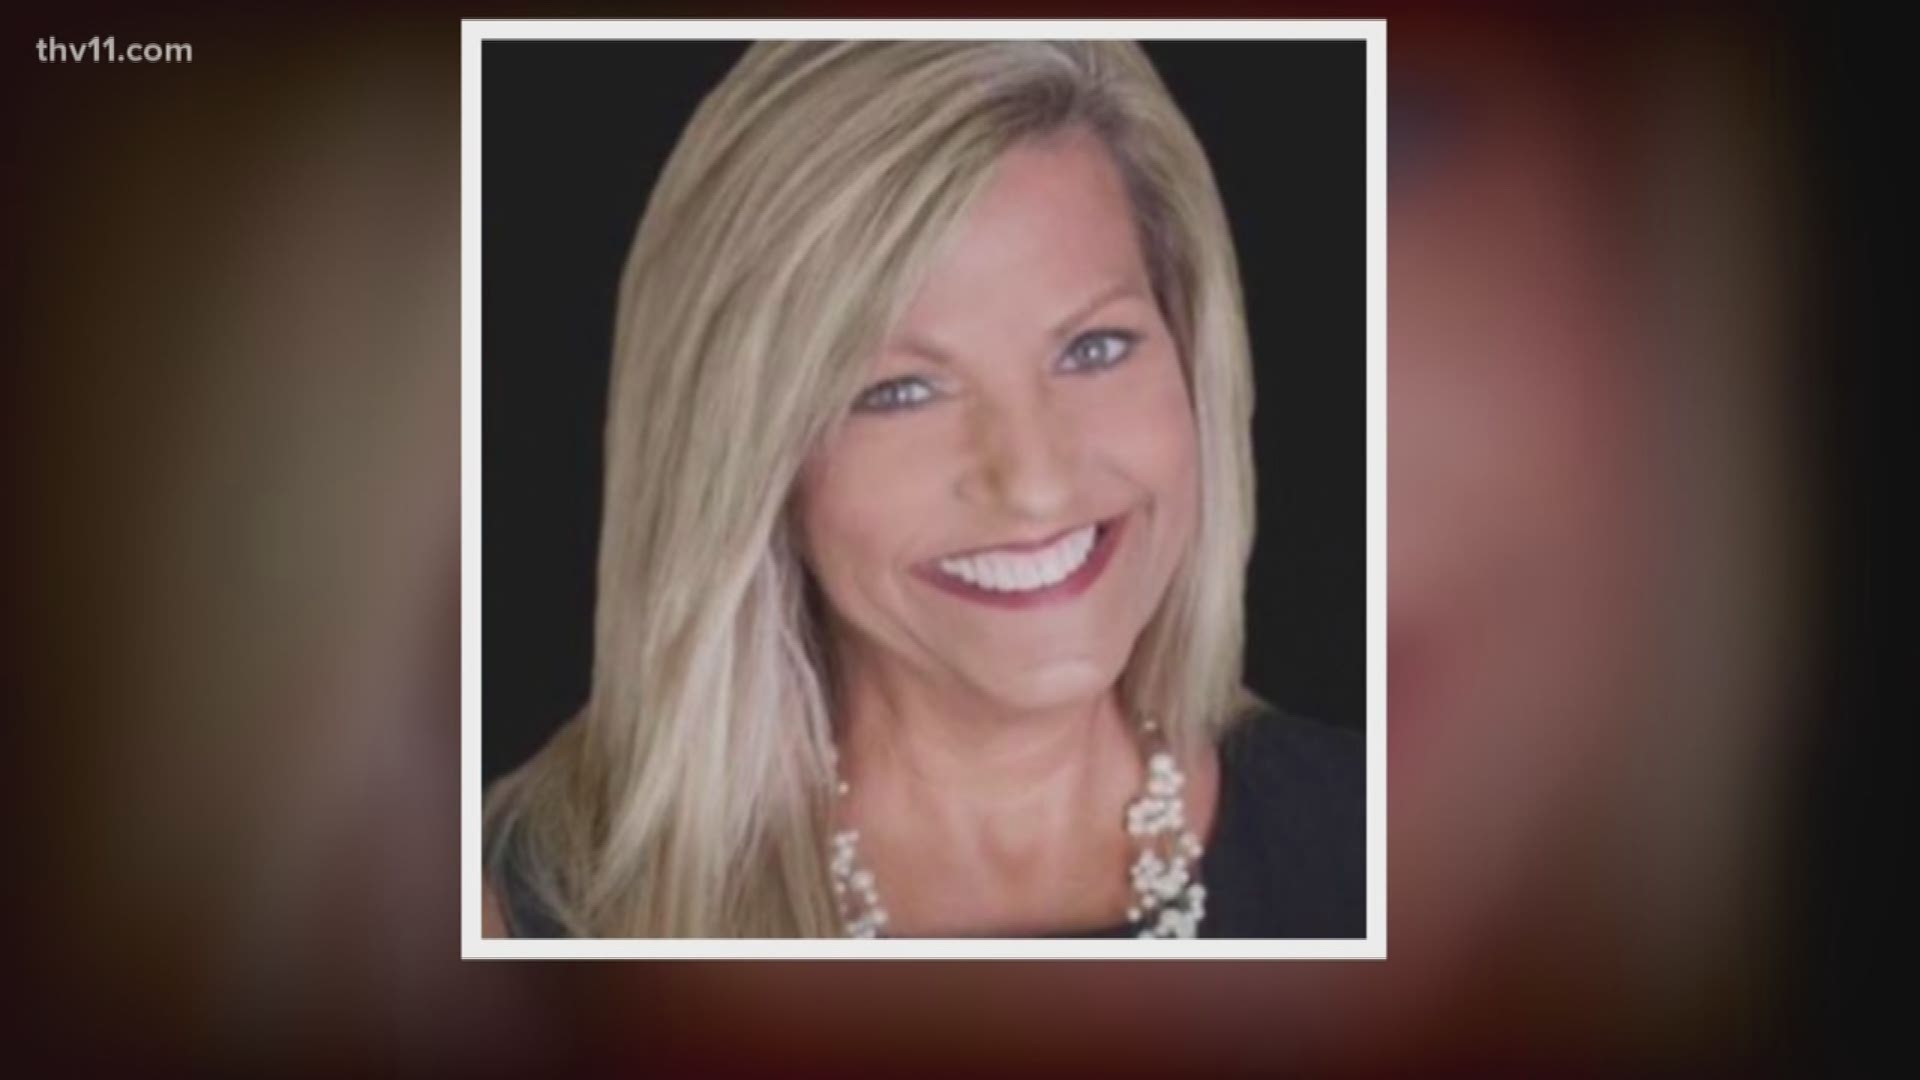 Beverly Carter was a local realtor who was kidnapped and killed four years ago this month.